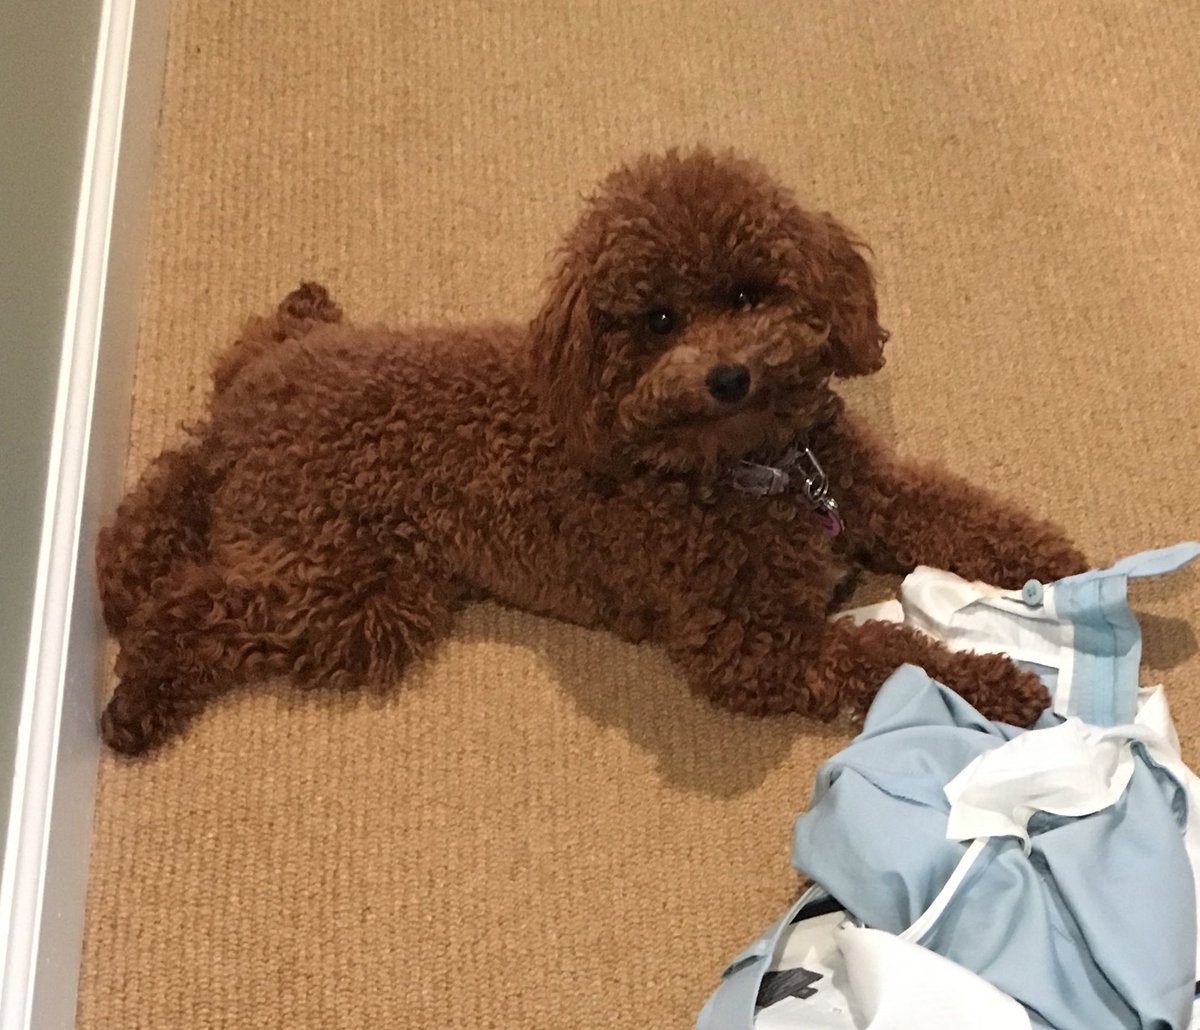 Happy to report that puppy services can confirm that the “Chicken” has completely adjusted to life with my parents, steals my dad’s clothes and does it with a smile. A successful placement for sure! #MiniaturePoodle